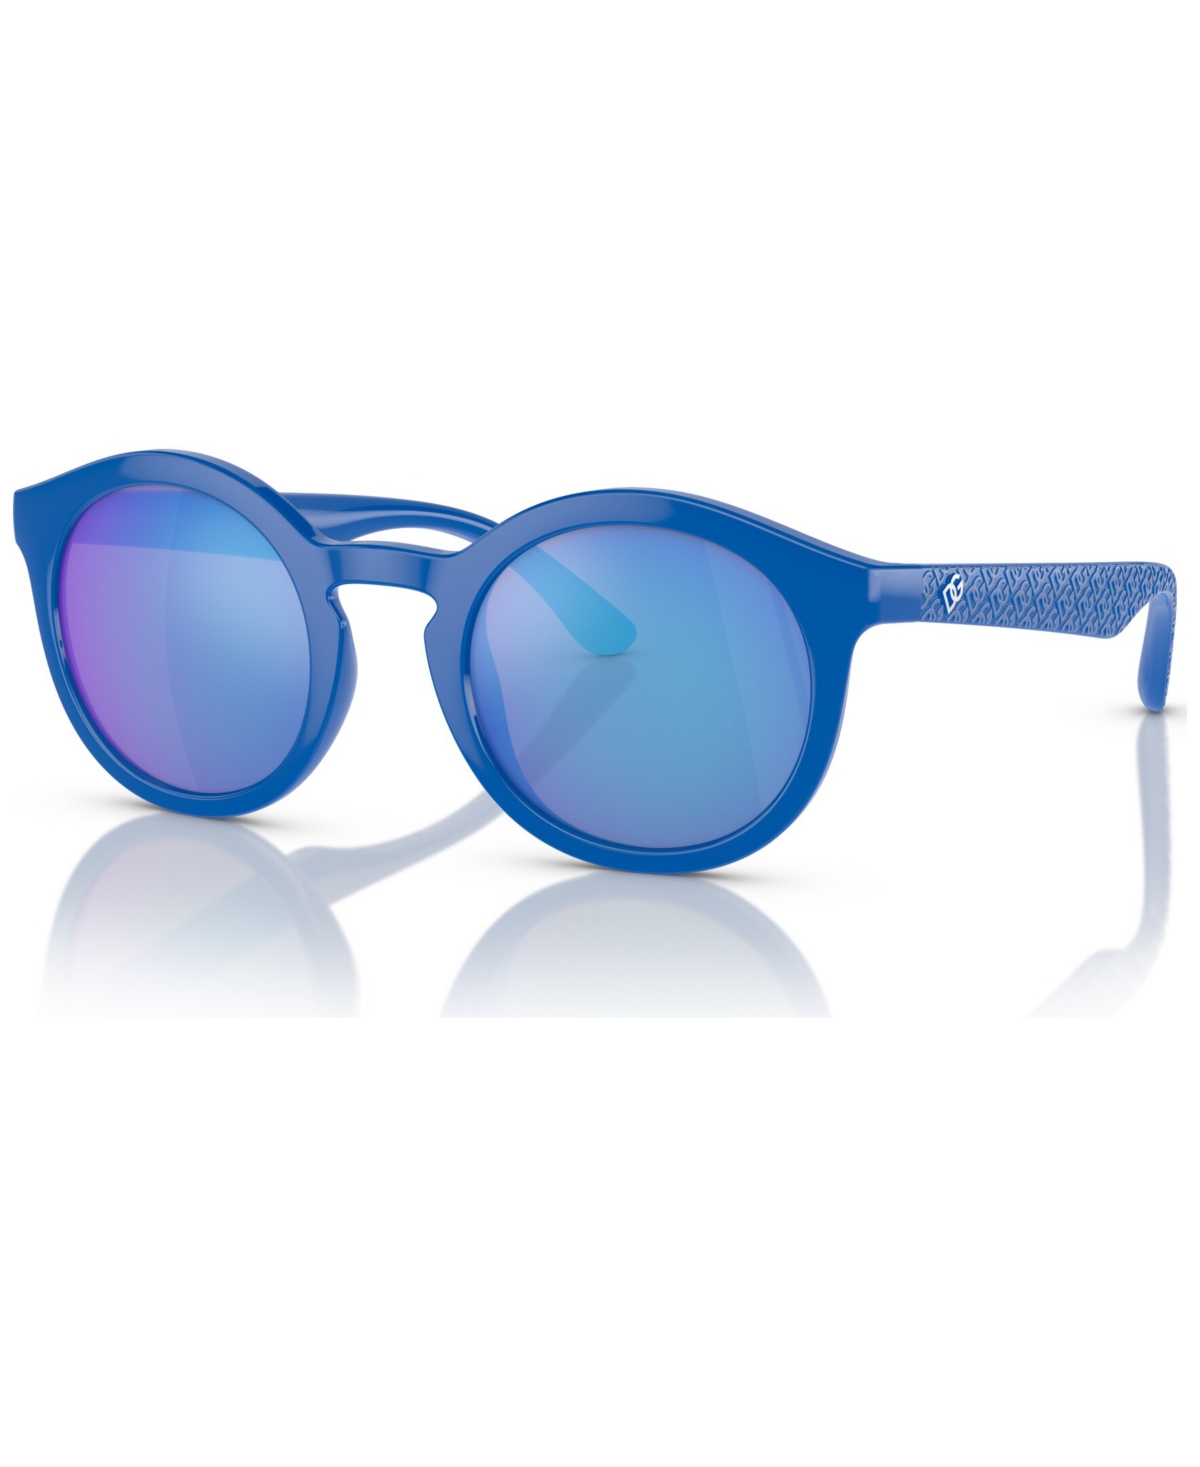 Dolce & Gabbana Kids Sunglasses, 0dx6002 (ages 7-10) In Blue